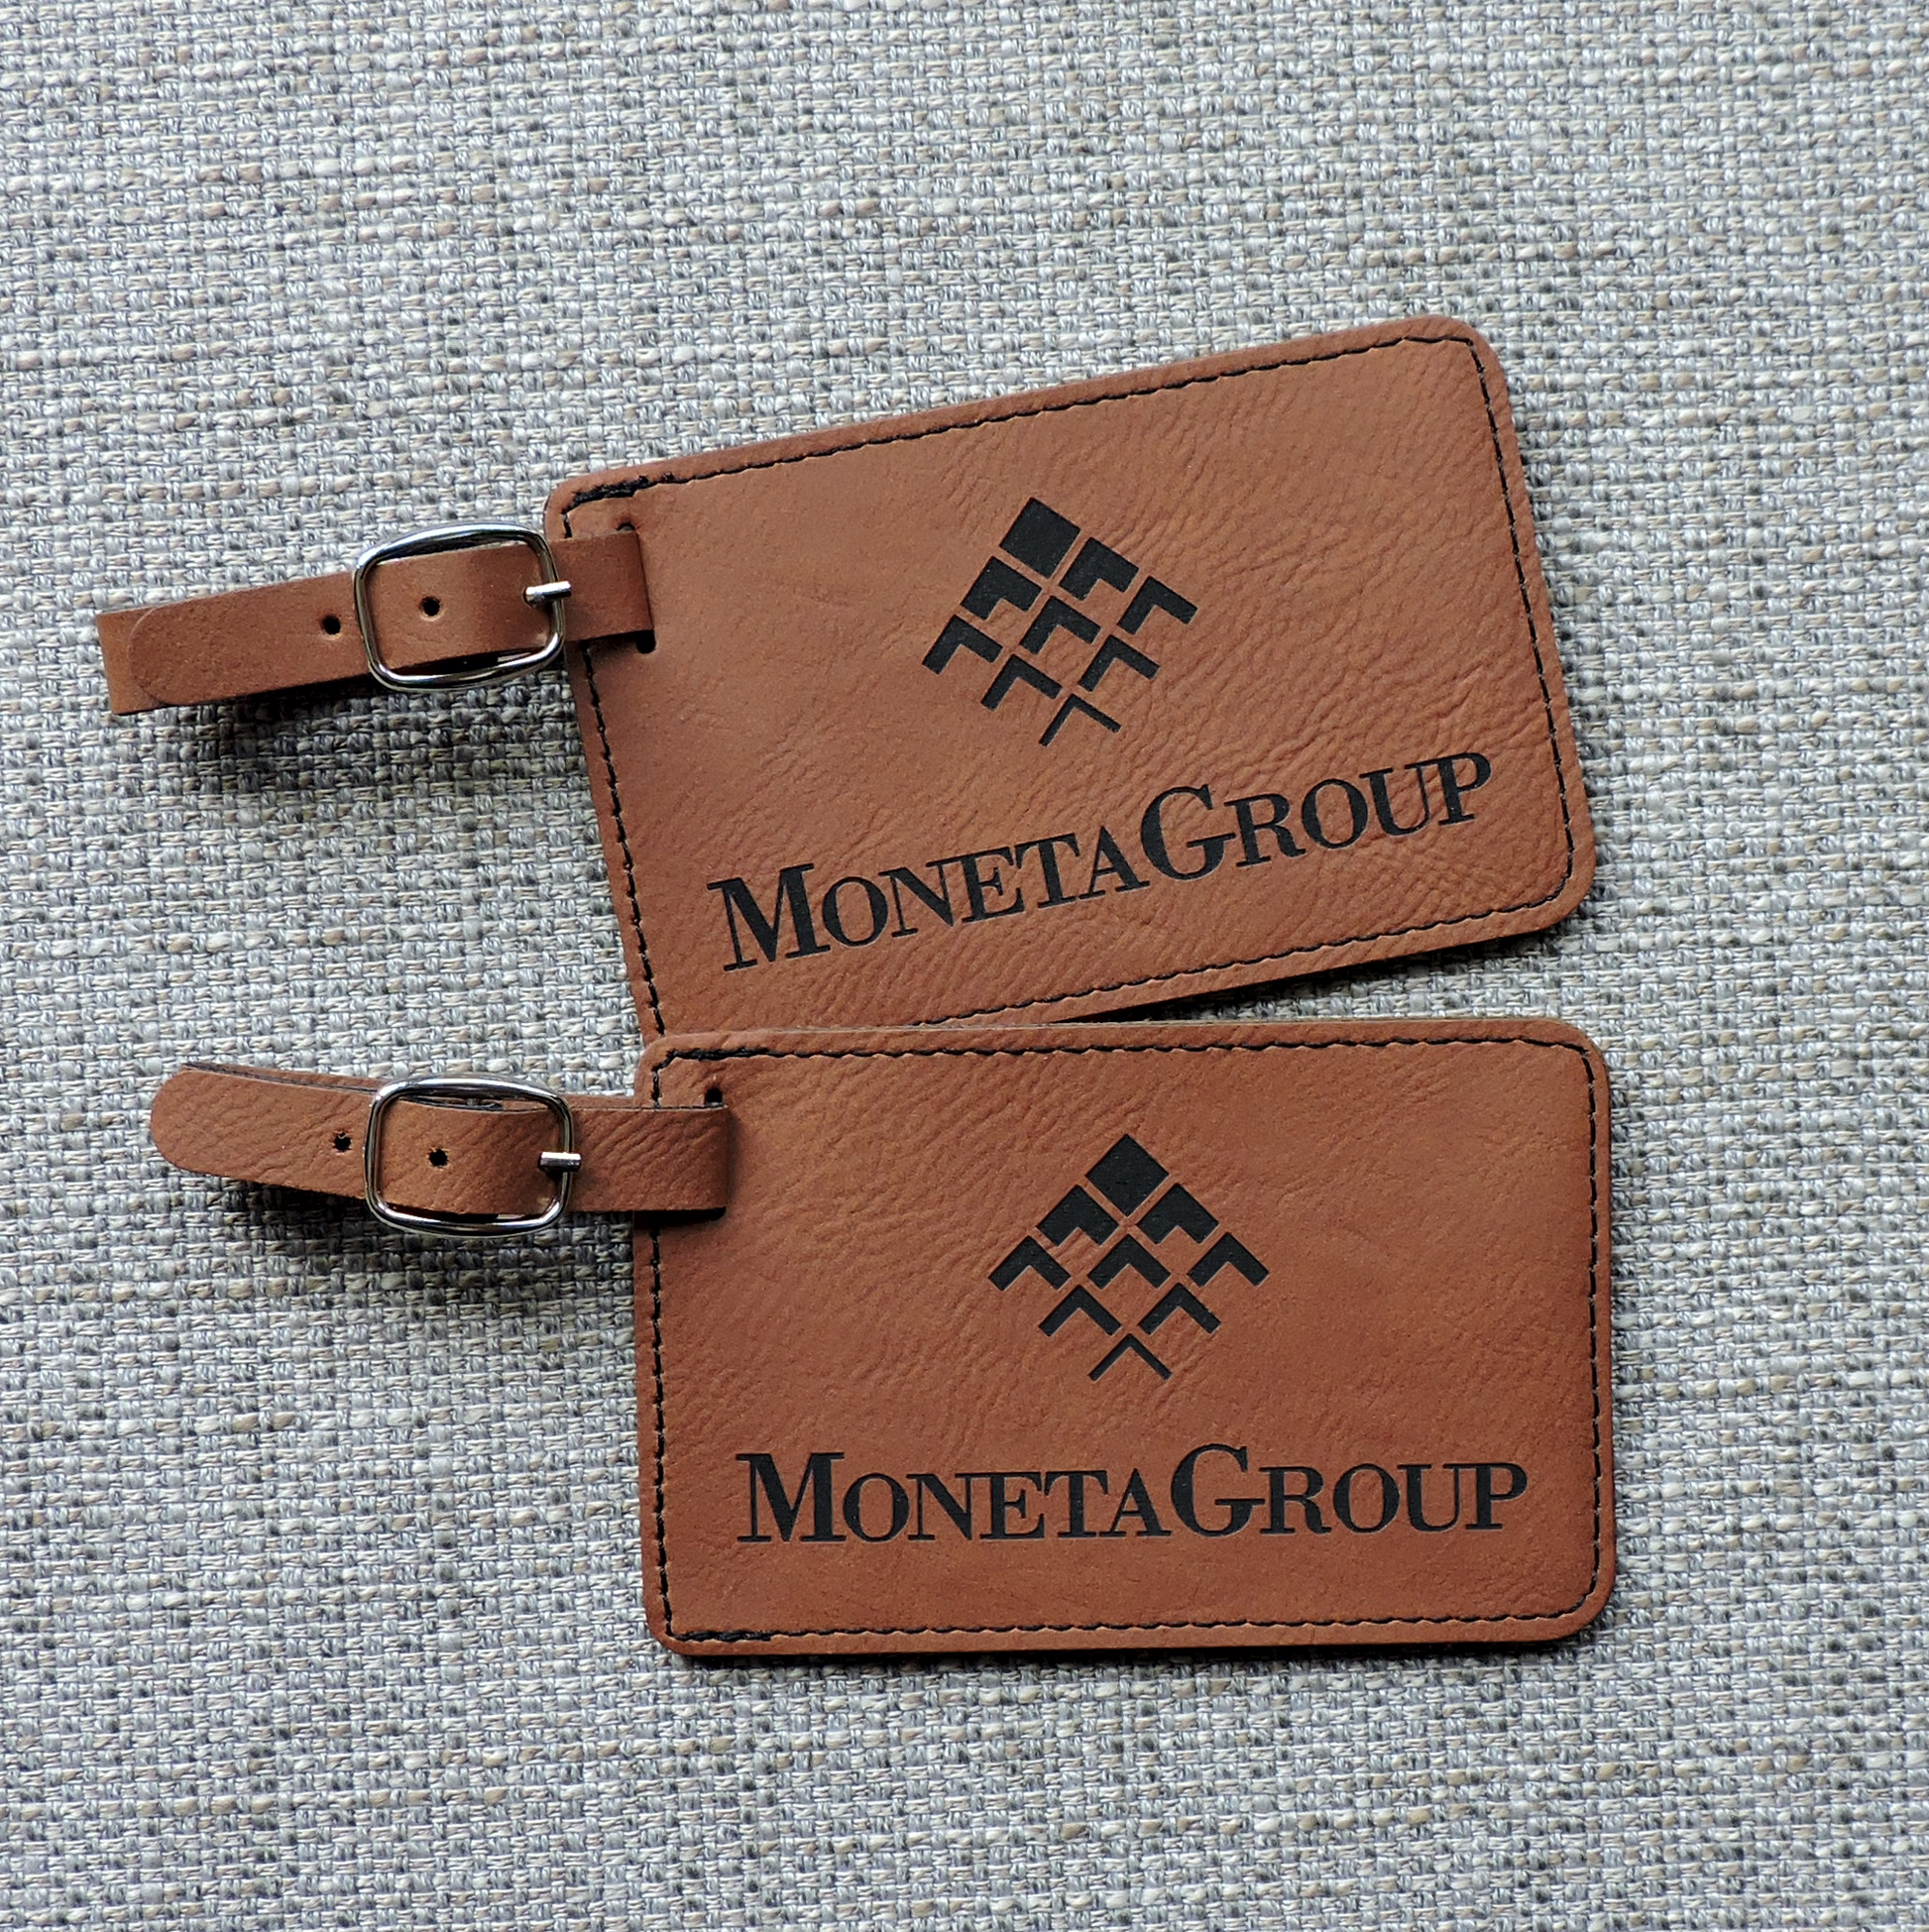  Personalized Monogrammed Antique Saddle Leather Luggage Tags -  3 Pack